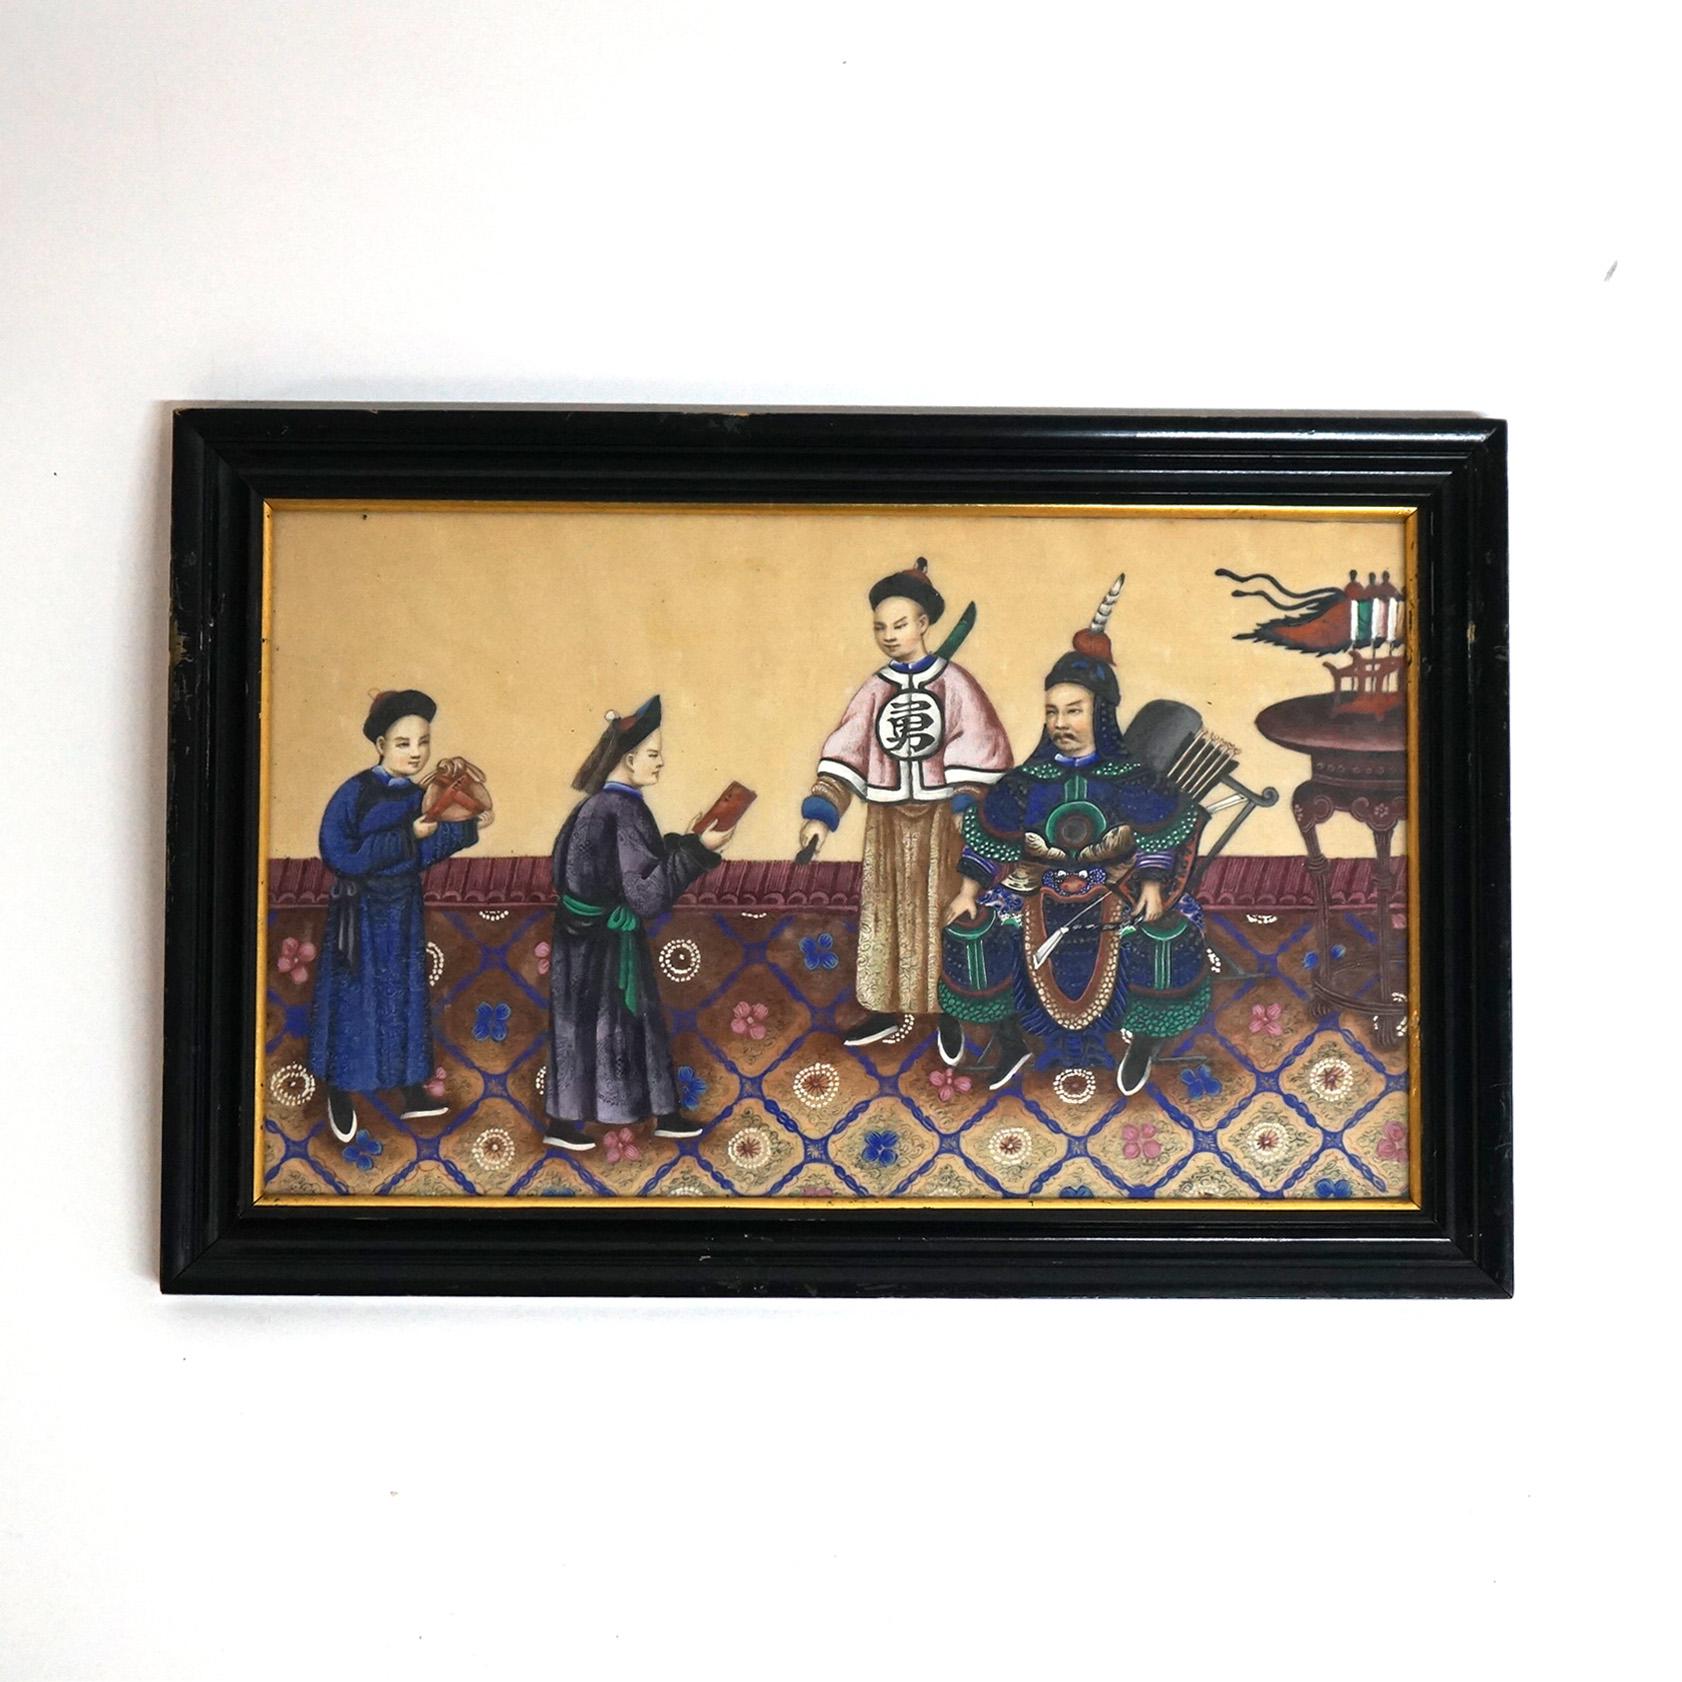 Four Antique Chinese Watercolor Paintings on Silk, Genre Scenes with Figures, Framed, c1920

Measures - 8.5